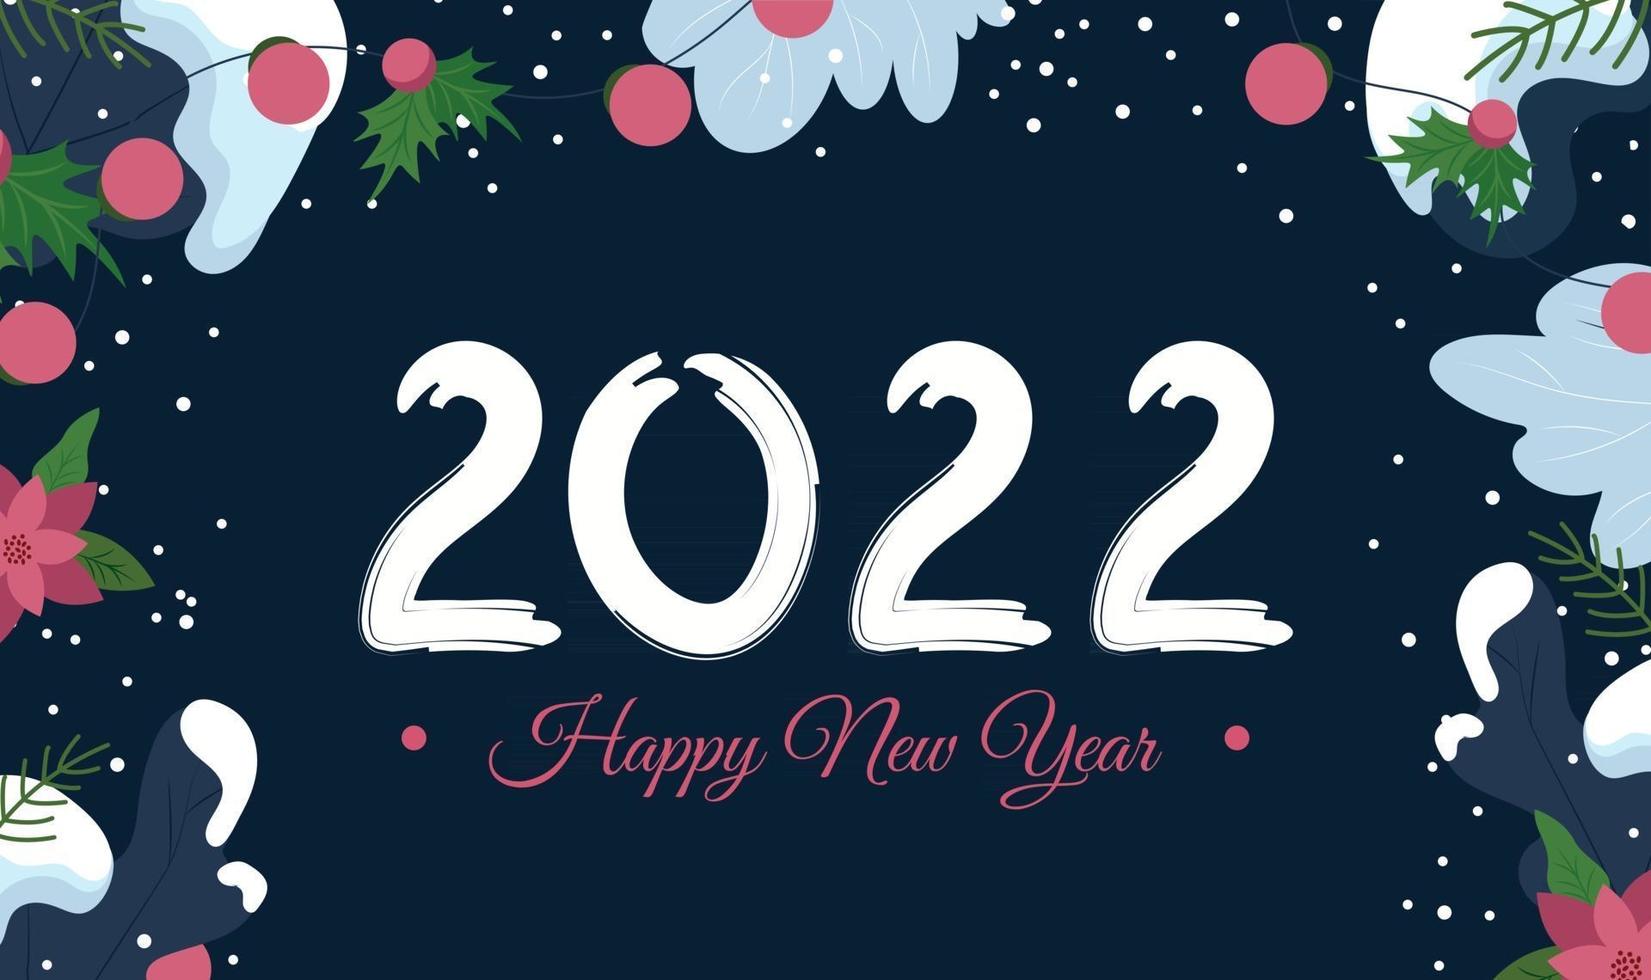 happy new year 2022 horizontal banner or greeting card template with elements of christmas tree and snowy branches cartoon background free vector